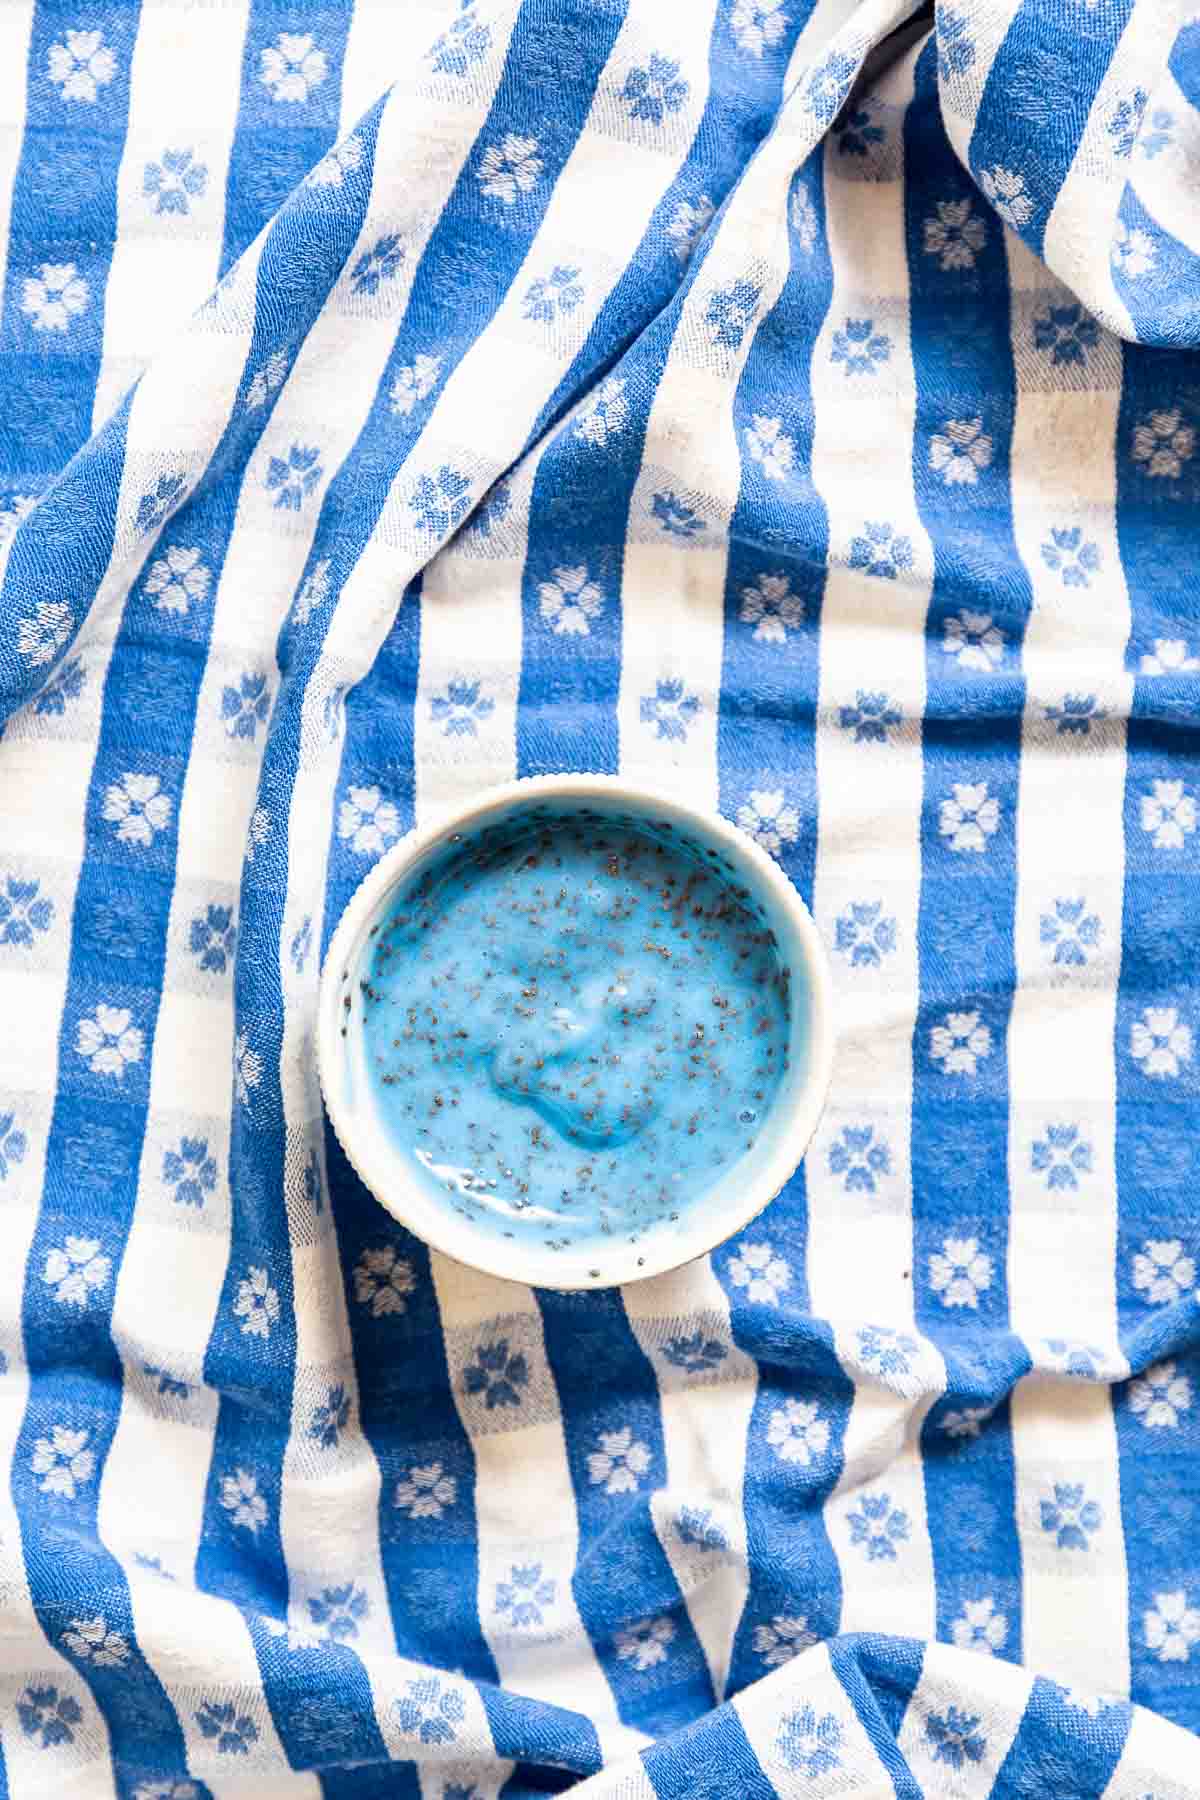 Blue yogurt with chia sees stirred into it, inside a ramekin on top of a blue gingham tablecloth.